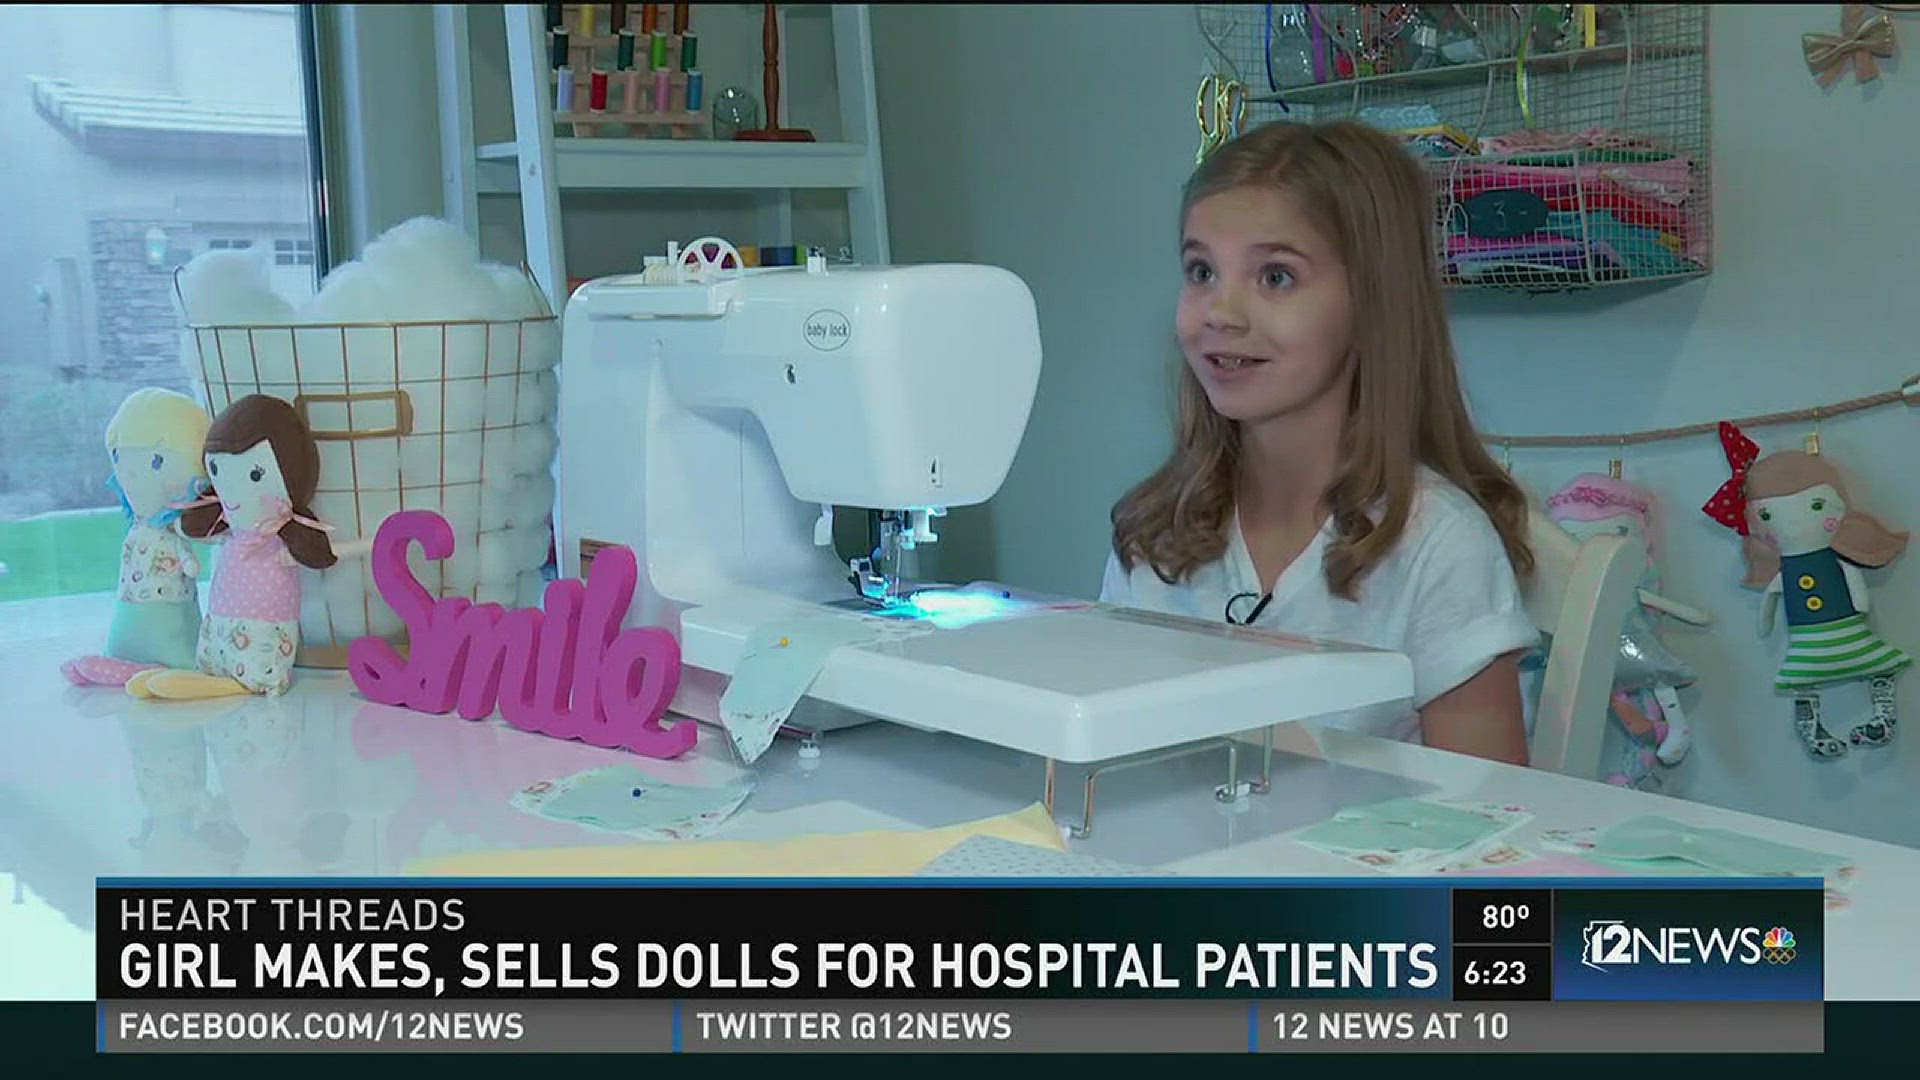 Her dream is to create a line of surgery companion dolls for children undergoing surgery. She's already made quite a few.